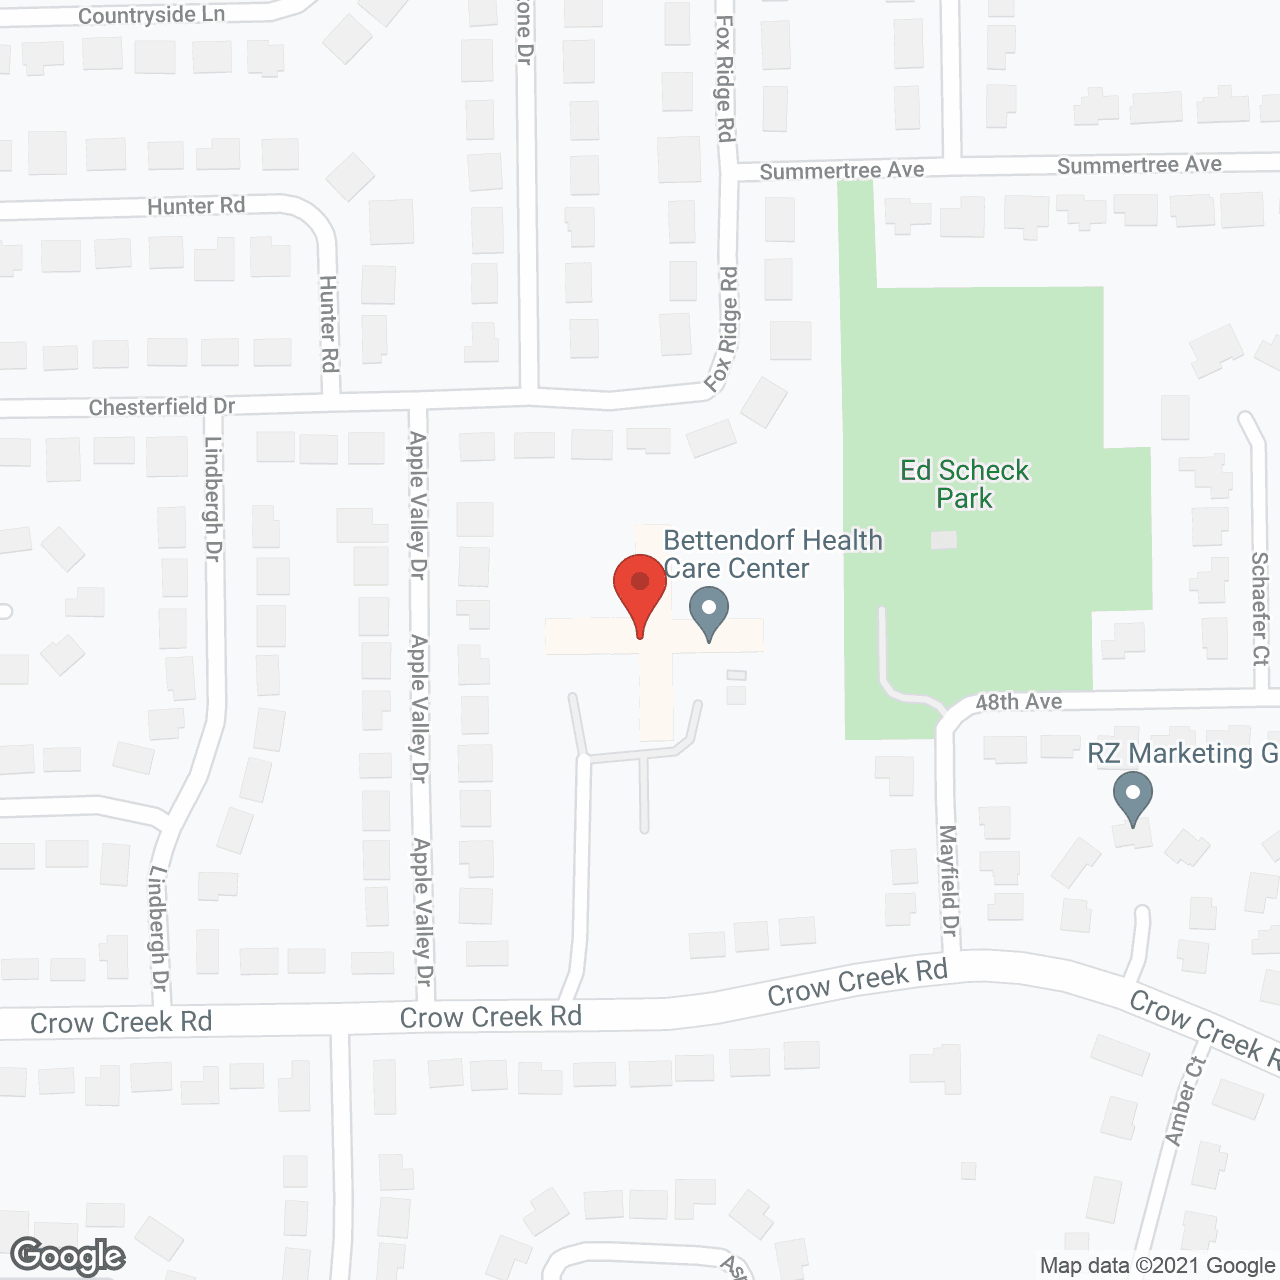 Bettendorf Health Care Ctr in google map